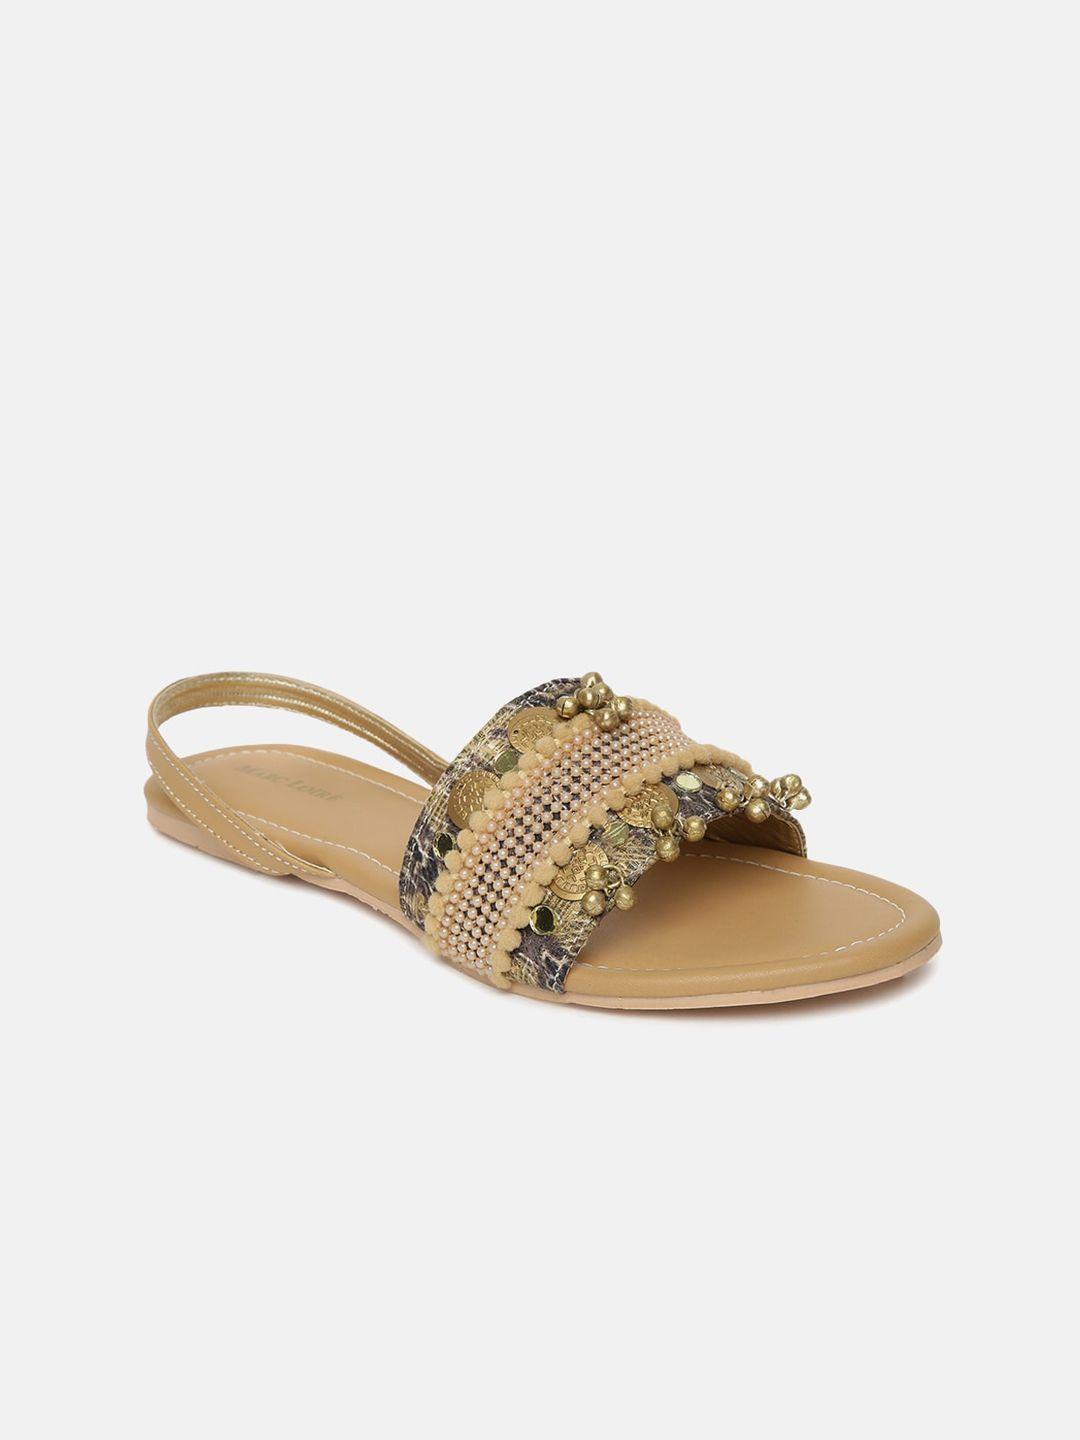 marc loire ethnic embellished open toe flats with backstrap